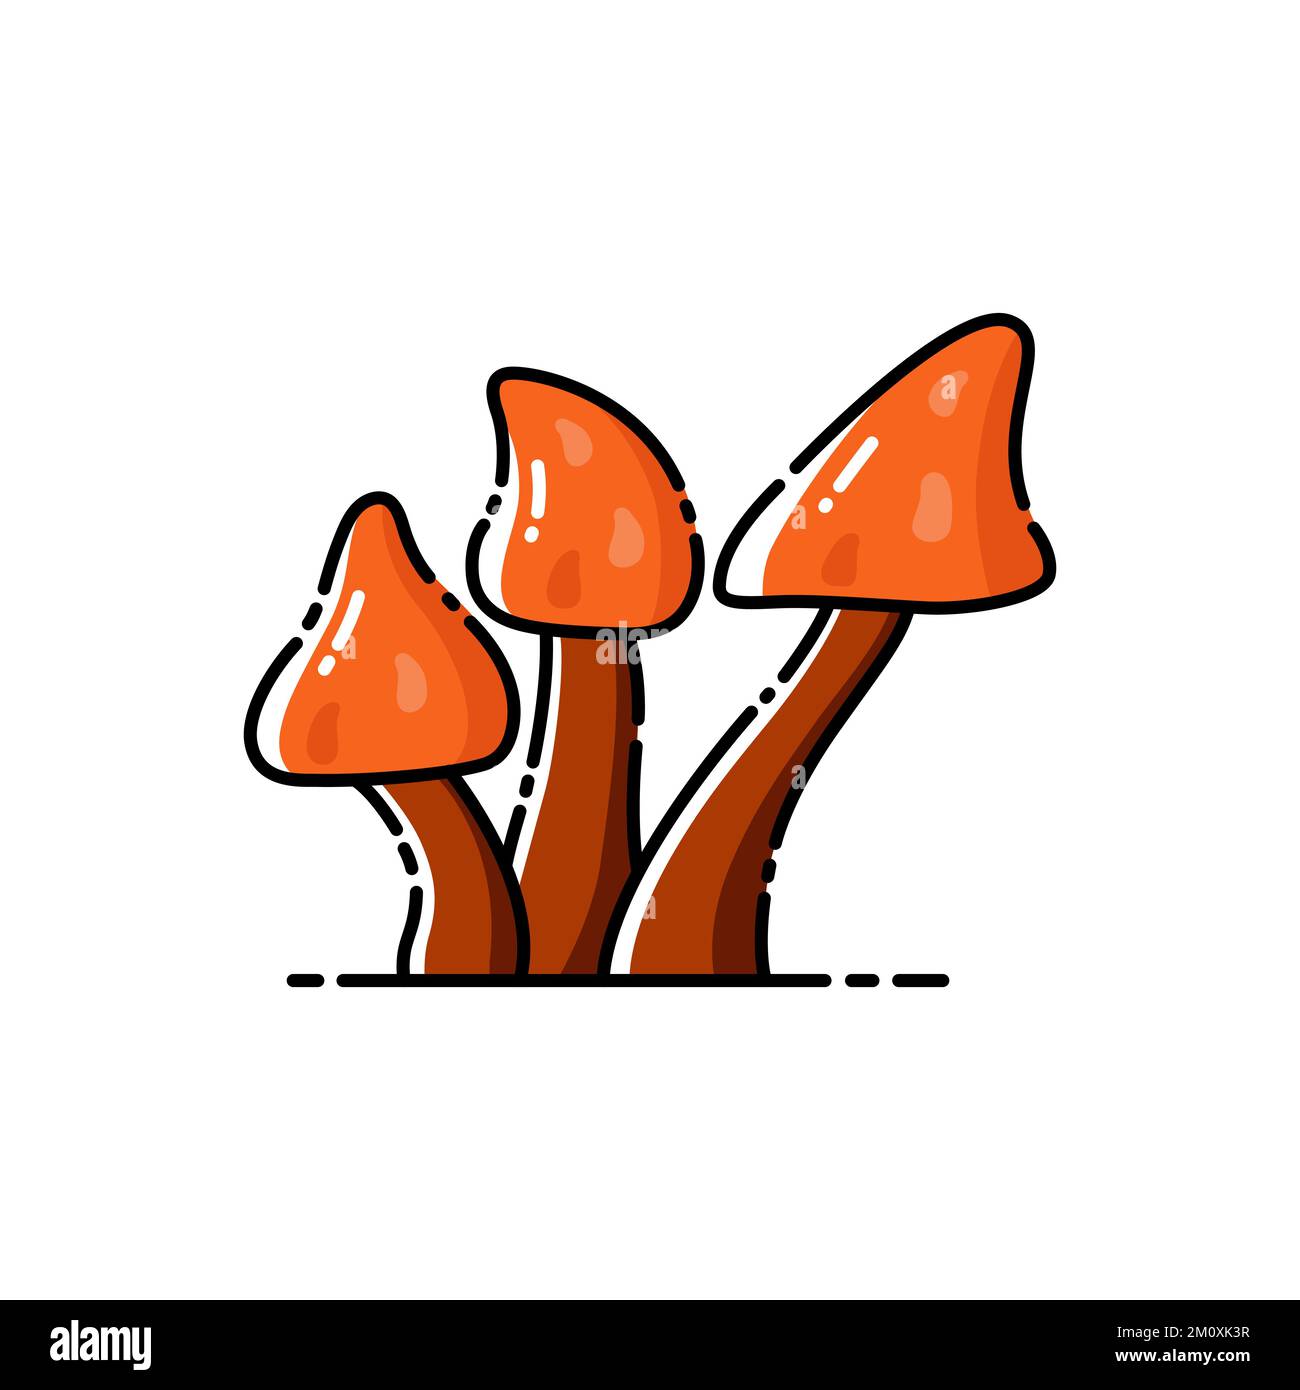 Group of orange mystical poisonous mushrooms on white isolated background. Stock Vector